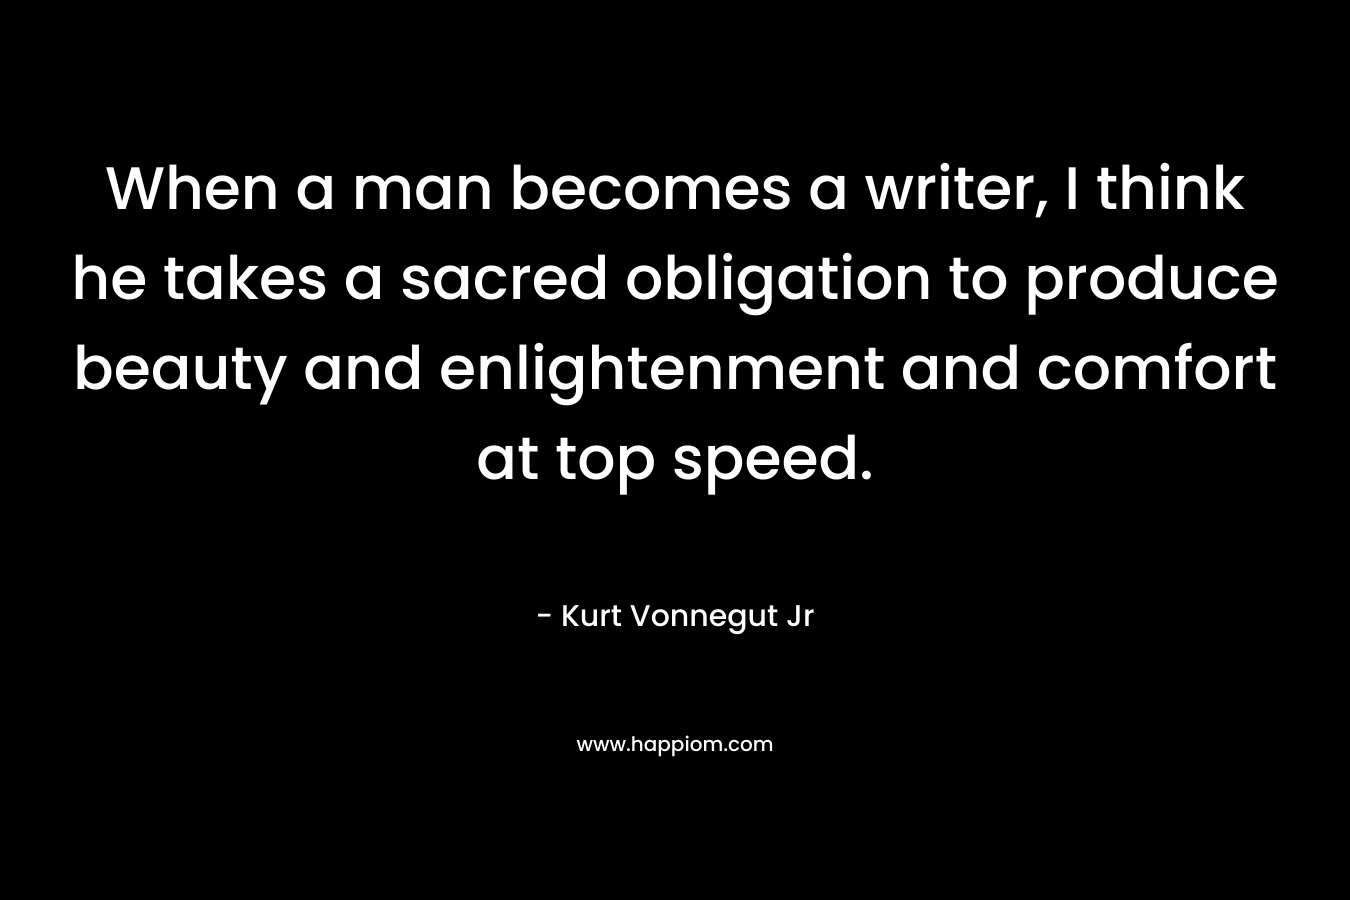 When a man becomes a writer, I think he takes a sacred obligation to produce beauty and enlightenment and comfort at top speed.